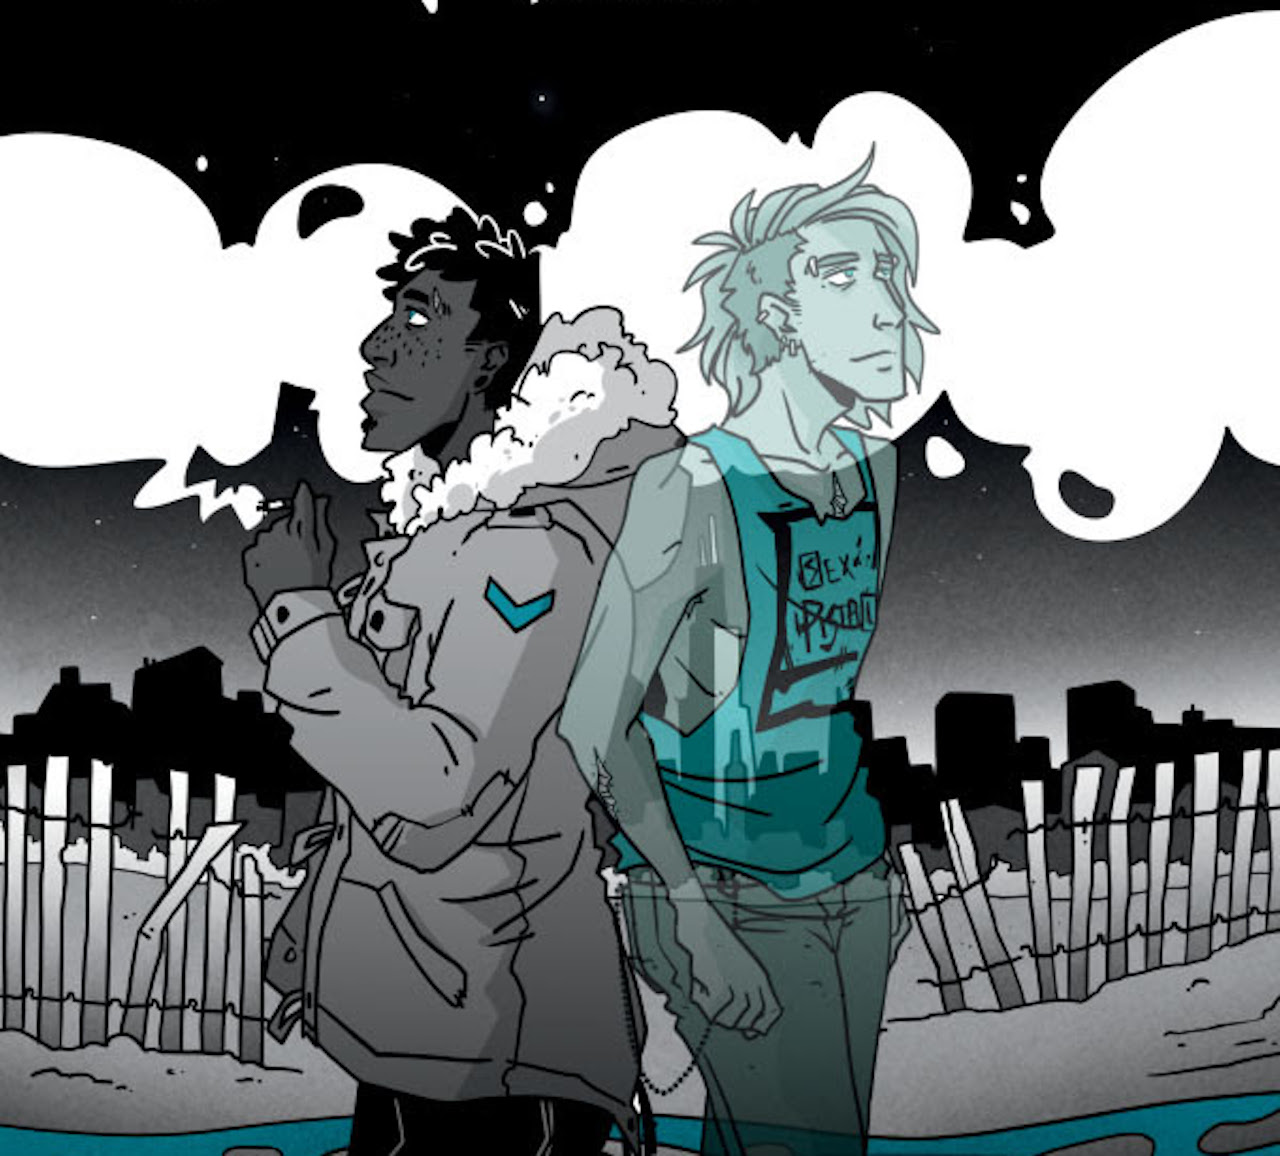 LGBTQ romance 'Light Carries On' drops into comic shops March 2023